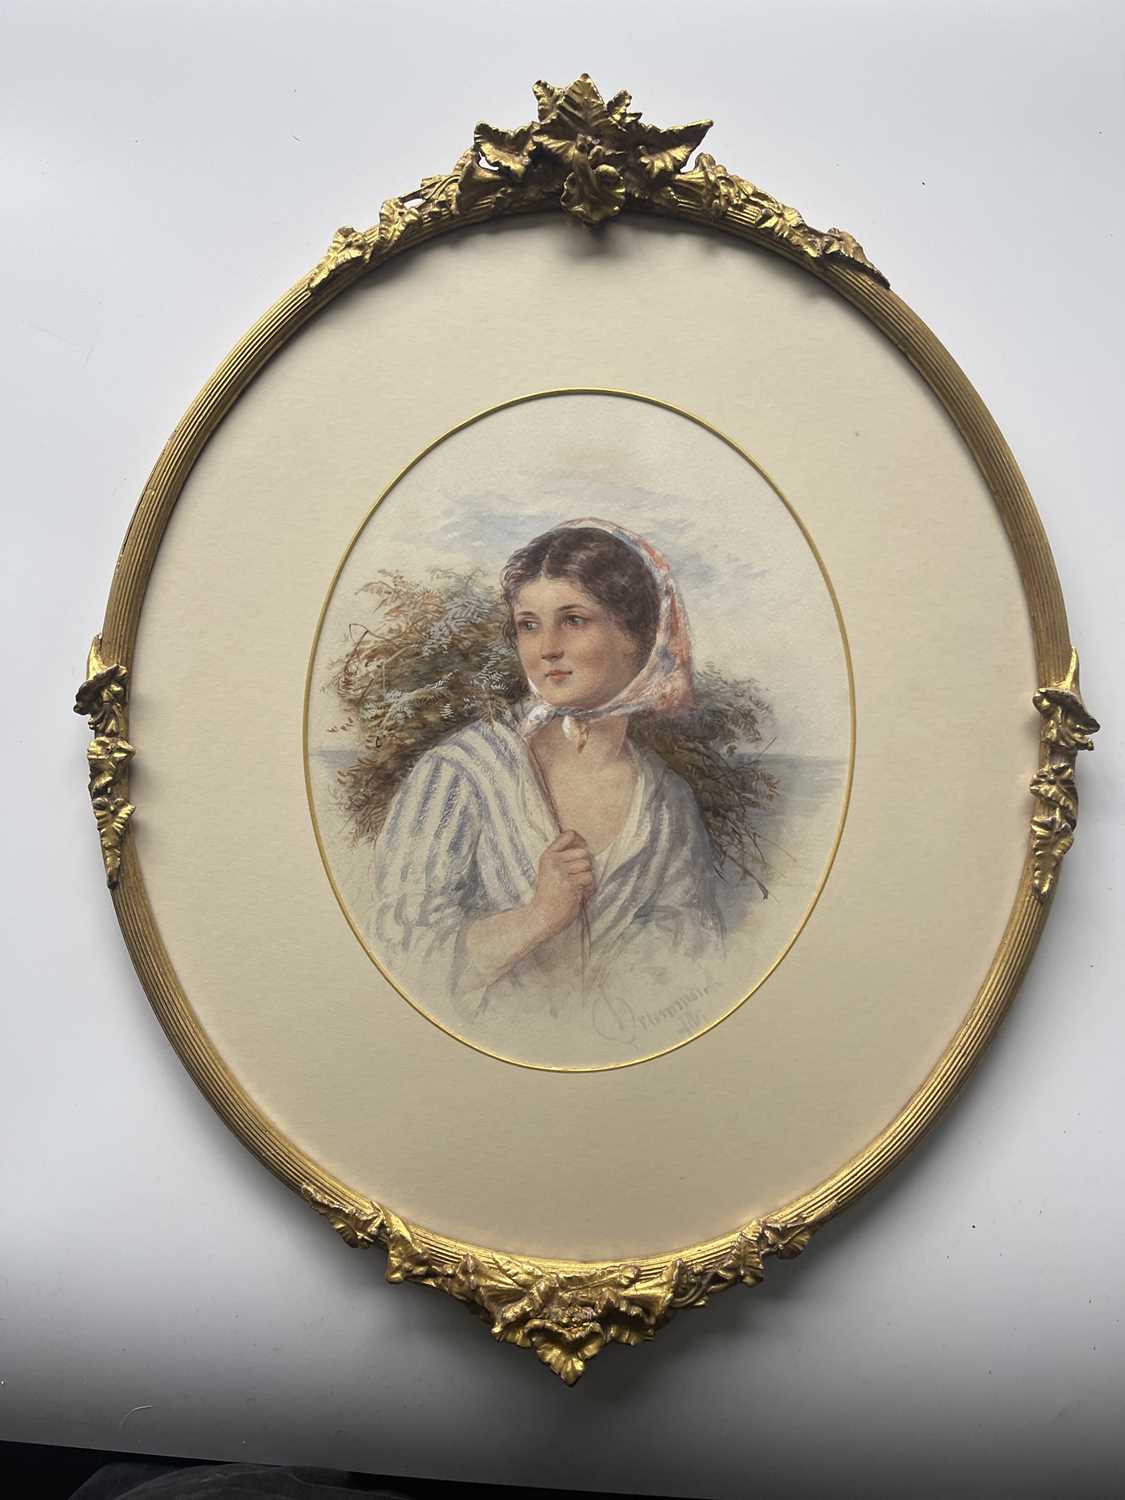 James Drummond (British, 1816-1877), portrait of a girl fern gatherer, bust-length wearing a - Image 2 of 4